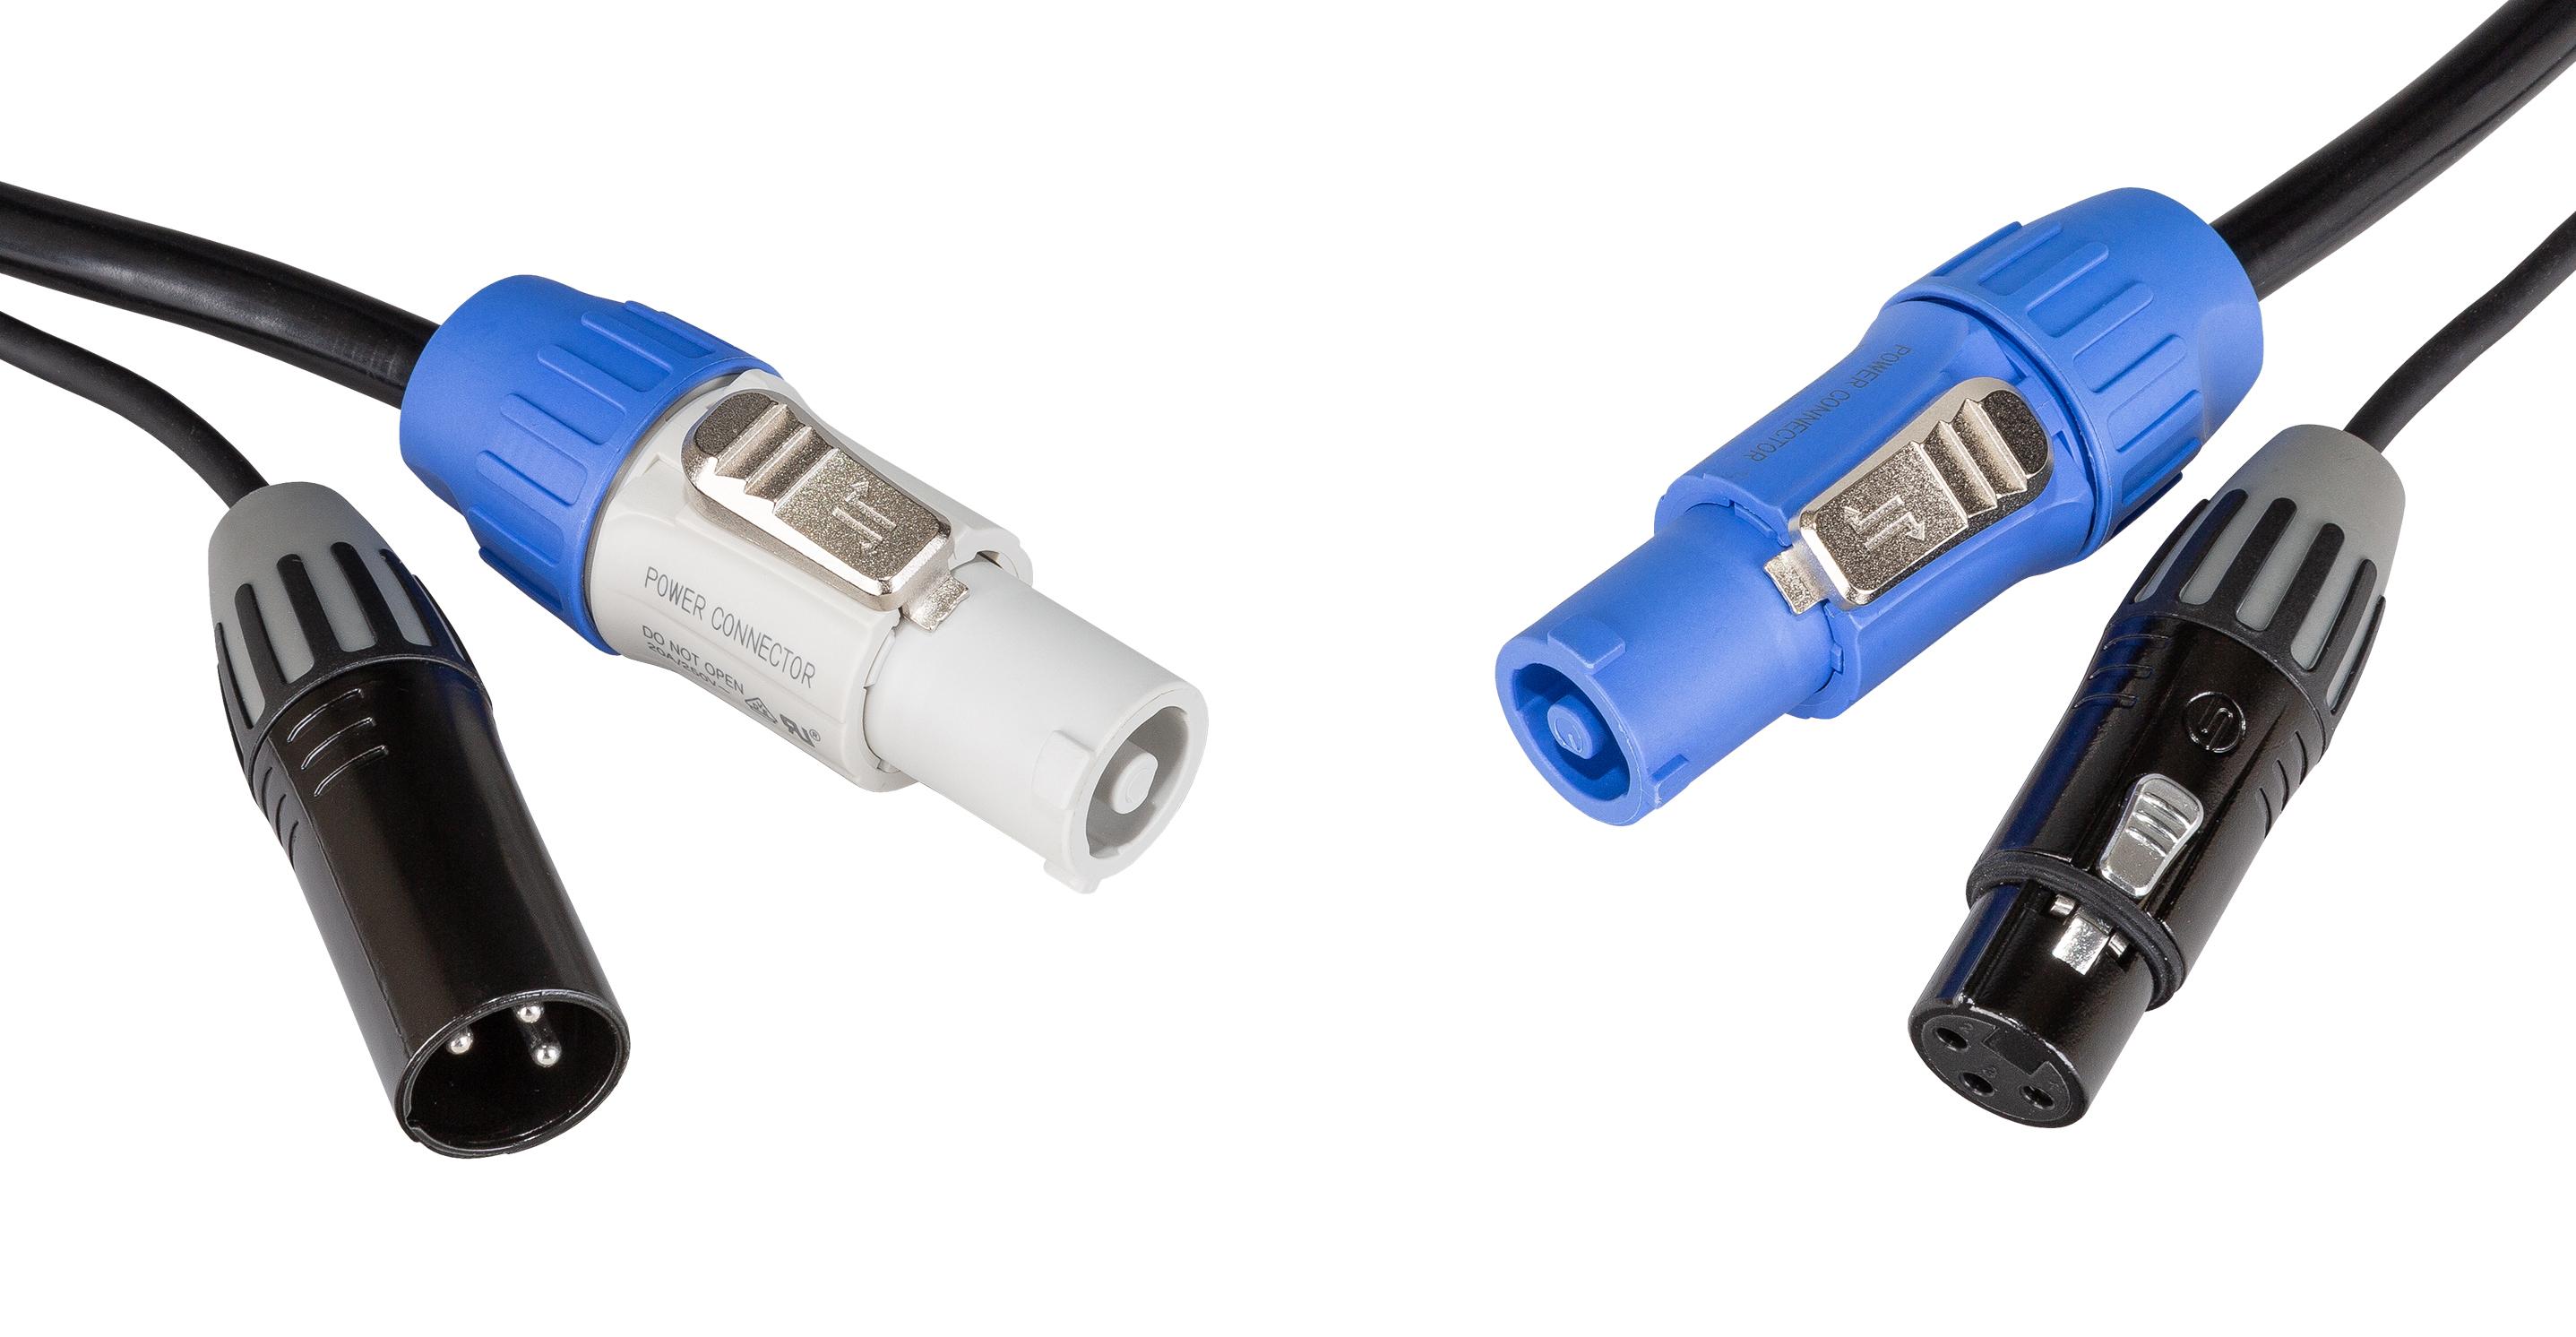 Combi cable with Seetronic XLR 3pin and Powercon compatible connectors, 3m